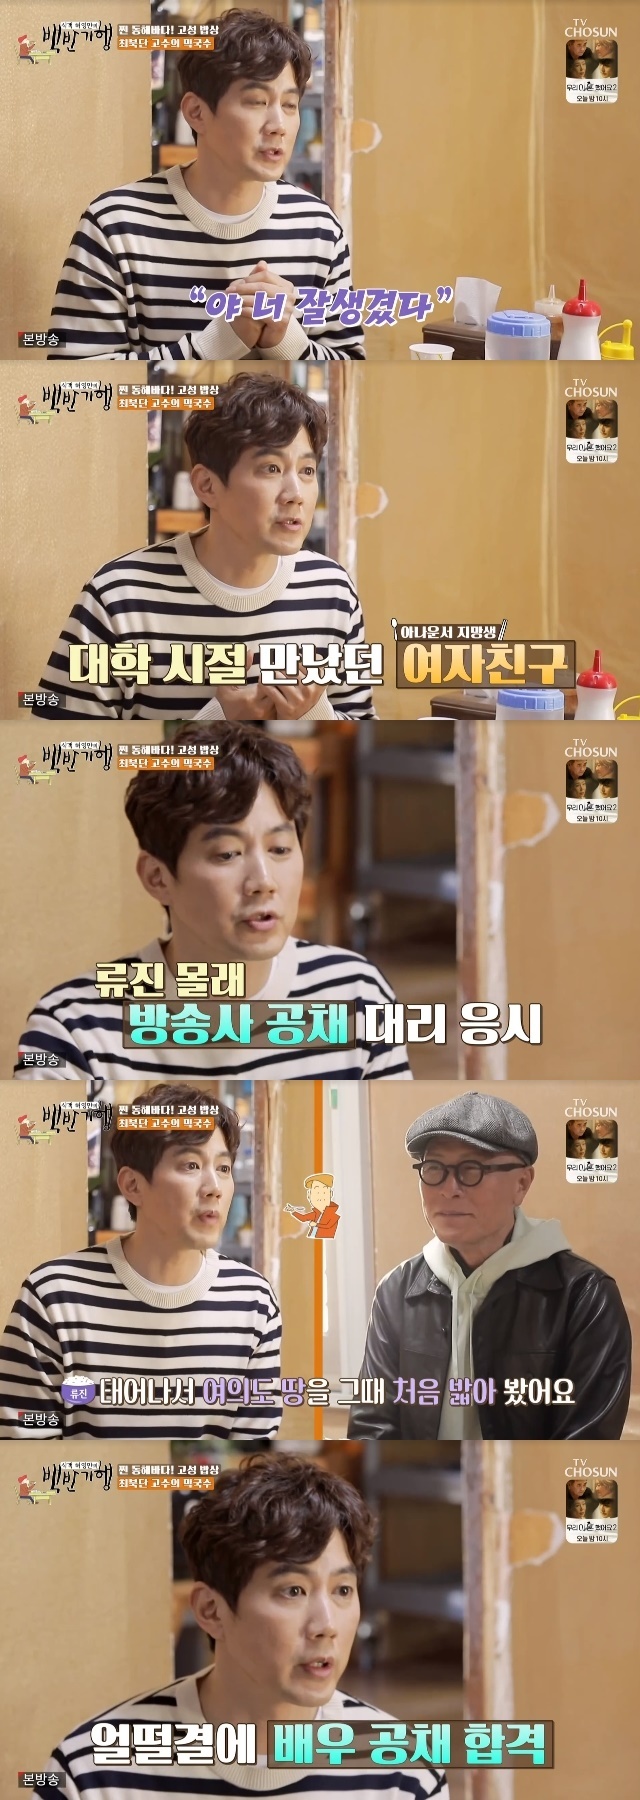 Ryu Jin released a picture of the past that was said to be popular and handsome, and made an unexpected debut.In the 148th episode of the TV Chosun Huh Young Mans Food Travel (hereinafter referred to as White Travel) broadcast on April 15, actor Ryu Jin joined the Goseong esophagus trip in Gangwon Province.How did you make your first debut? Huh Young-man asked Ryu Jin.Ryu Jin said, In fact, the dream was a hotelier. This side (actor) had no idea and no interest. Ive always heard that. Hes handsome.There are no popular boys, no men, he said.I had a girlfriend I met at the time, but I would have a profile photo of me. I put it on, but I had no idea and said, I applied, so go and look at it.So I was born and stepped on the land of Yeouido for the first time. I was lucky then, and it was all over the first, second, third and fourth interviews, so it became a bond, Ryu Jin said.Huh Young-man asked, Are you not married now? and Ryu Jin replied, Yes, and laughed.